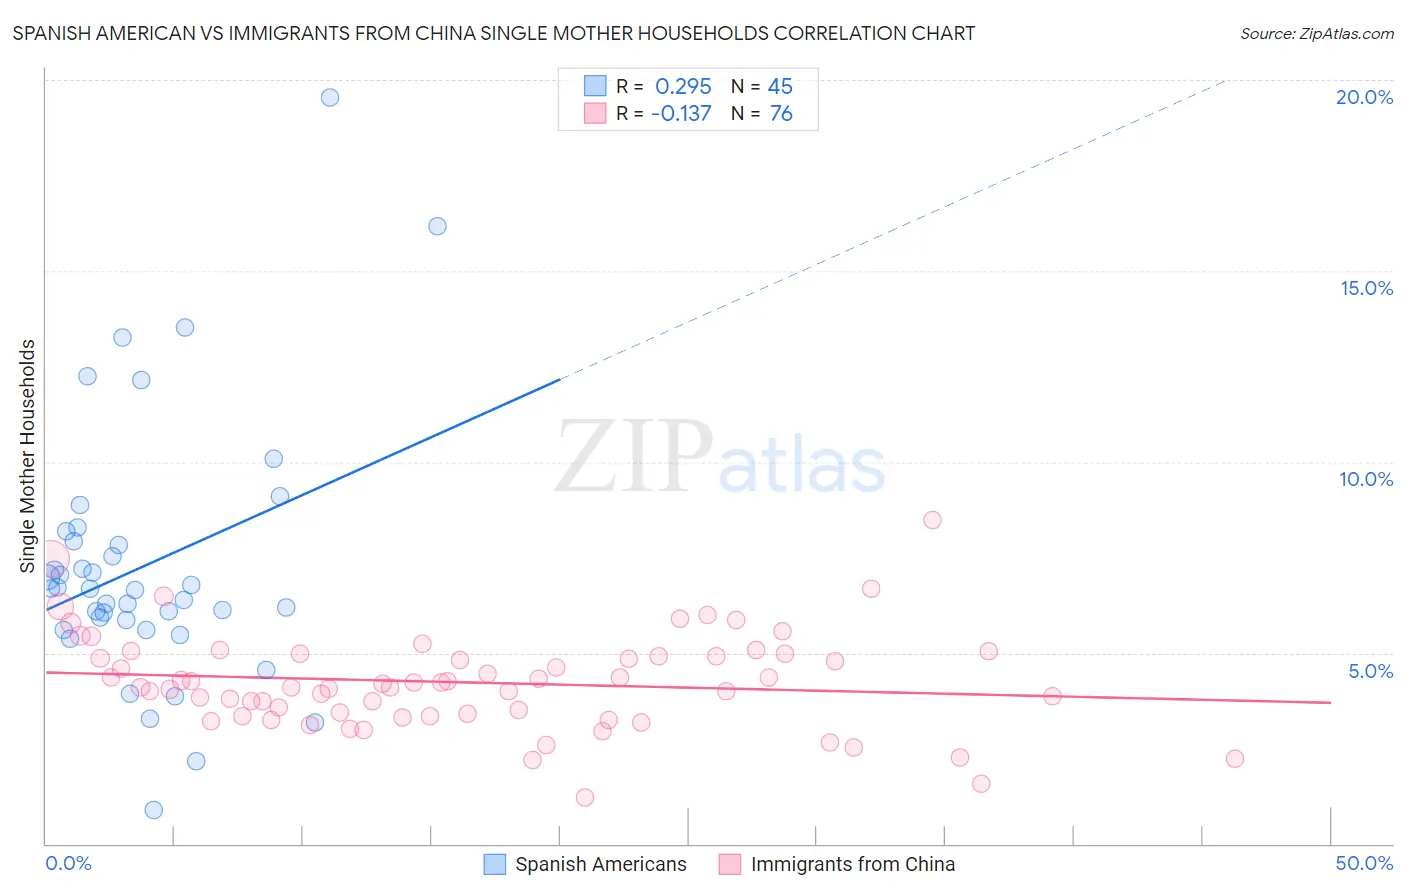 Spanish American vs Immigrants from China Single Mother Households